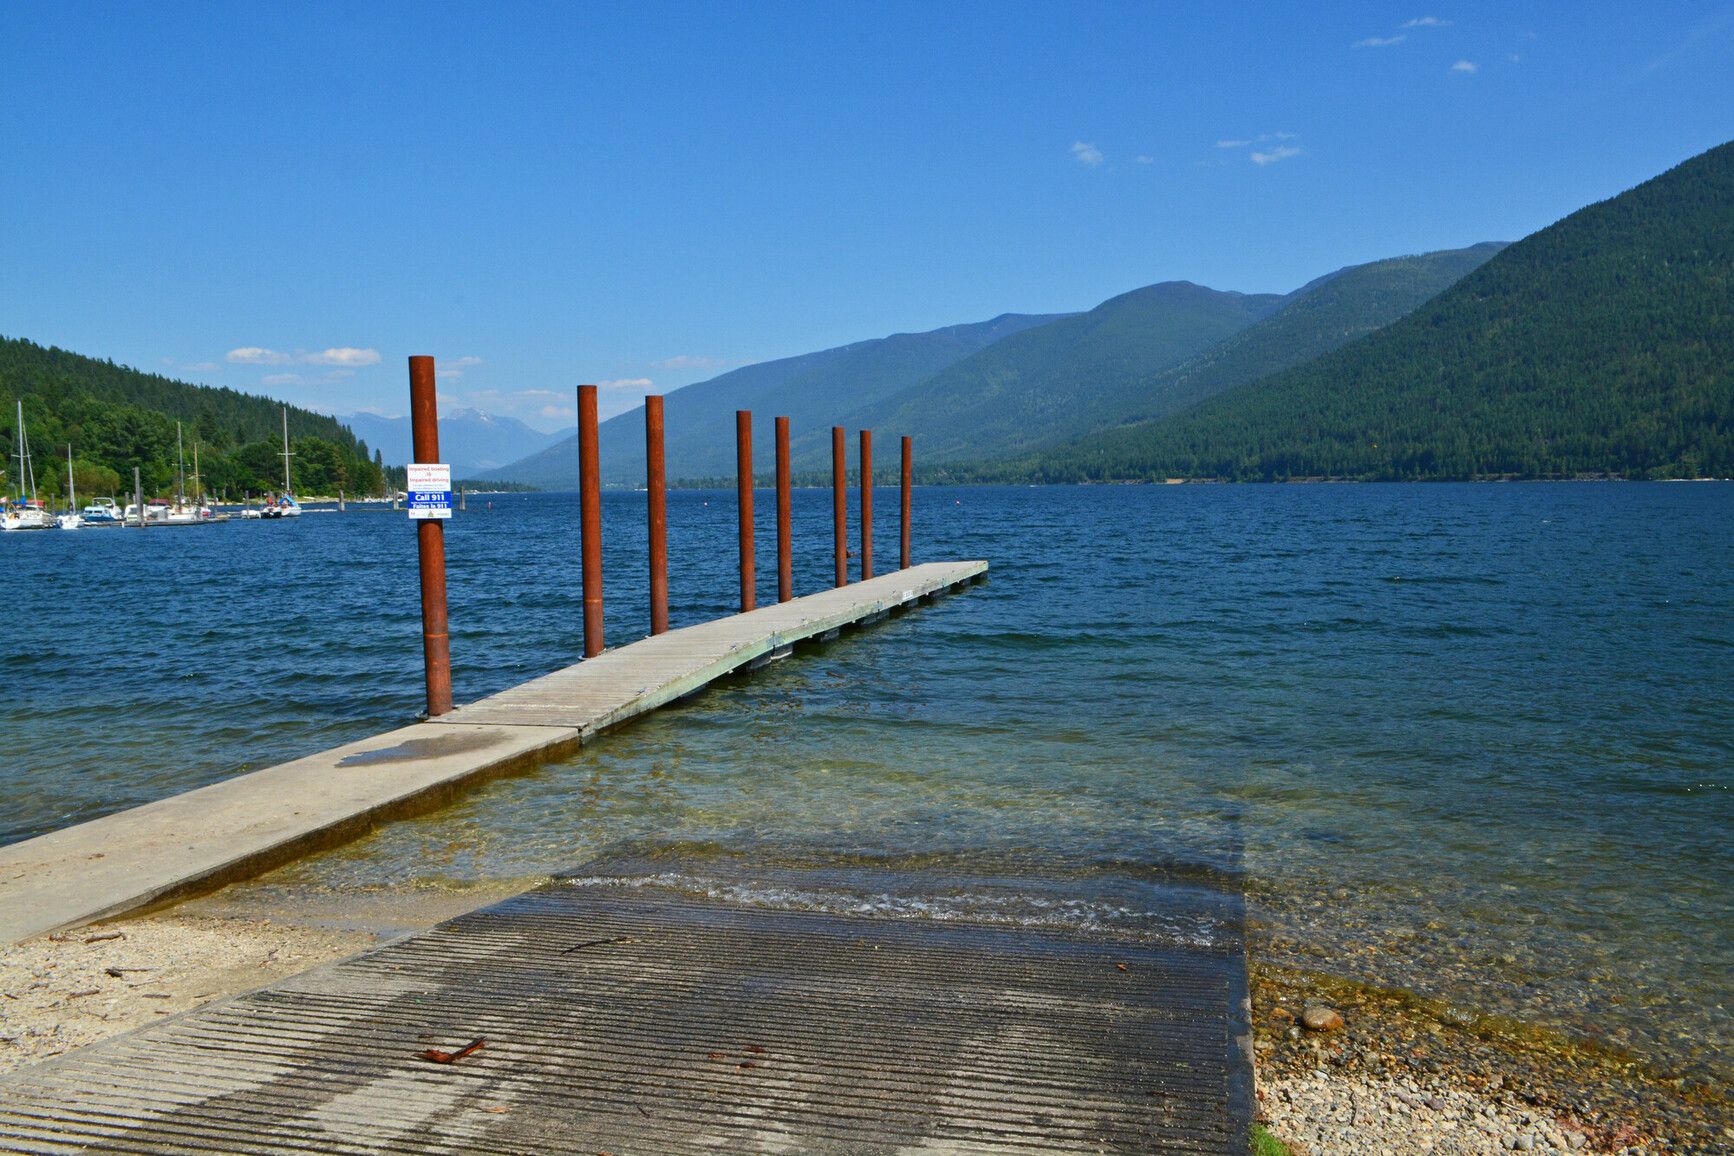 Boat launch and dock at lake with view of mountains in the background, Kokanee Creek Park.